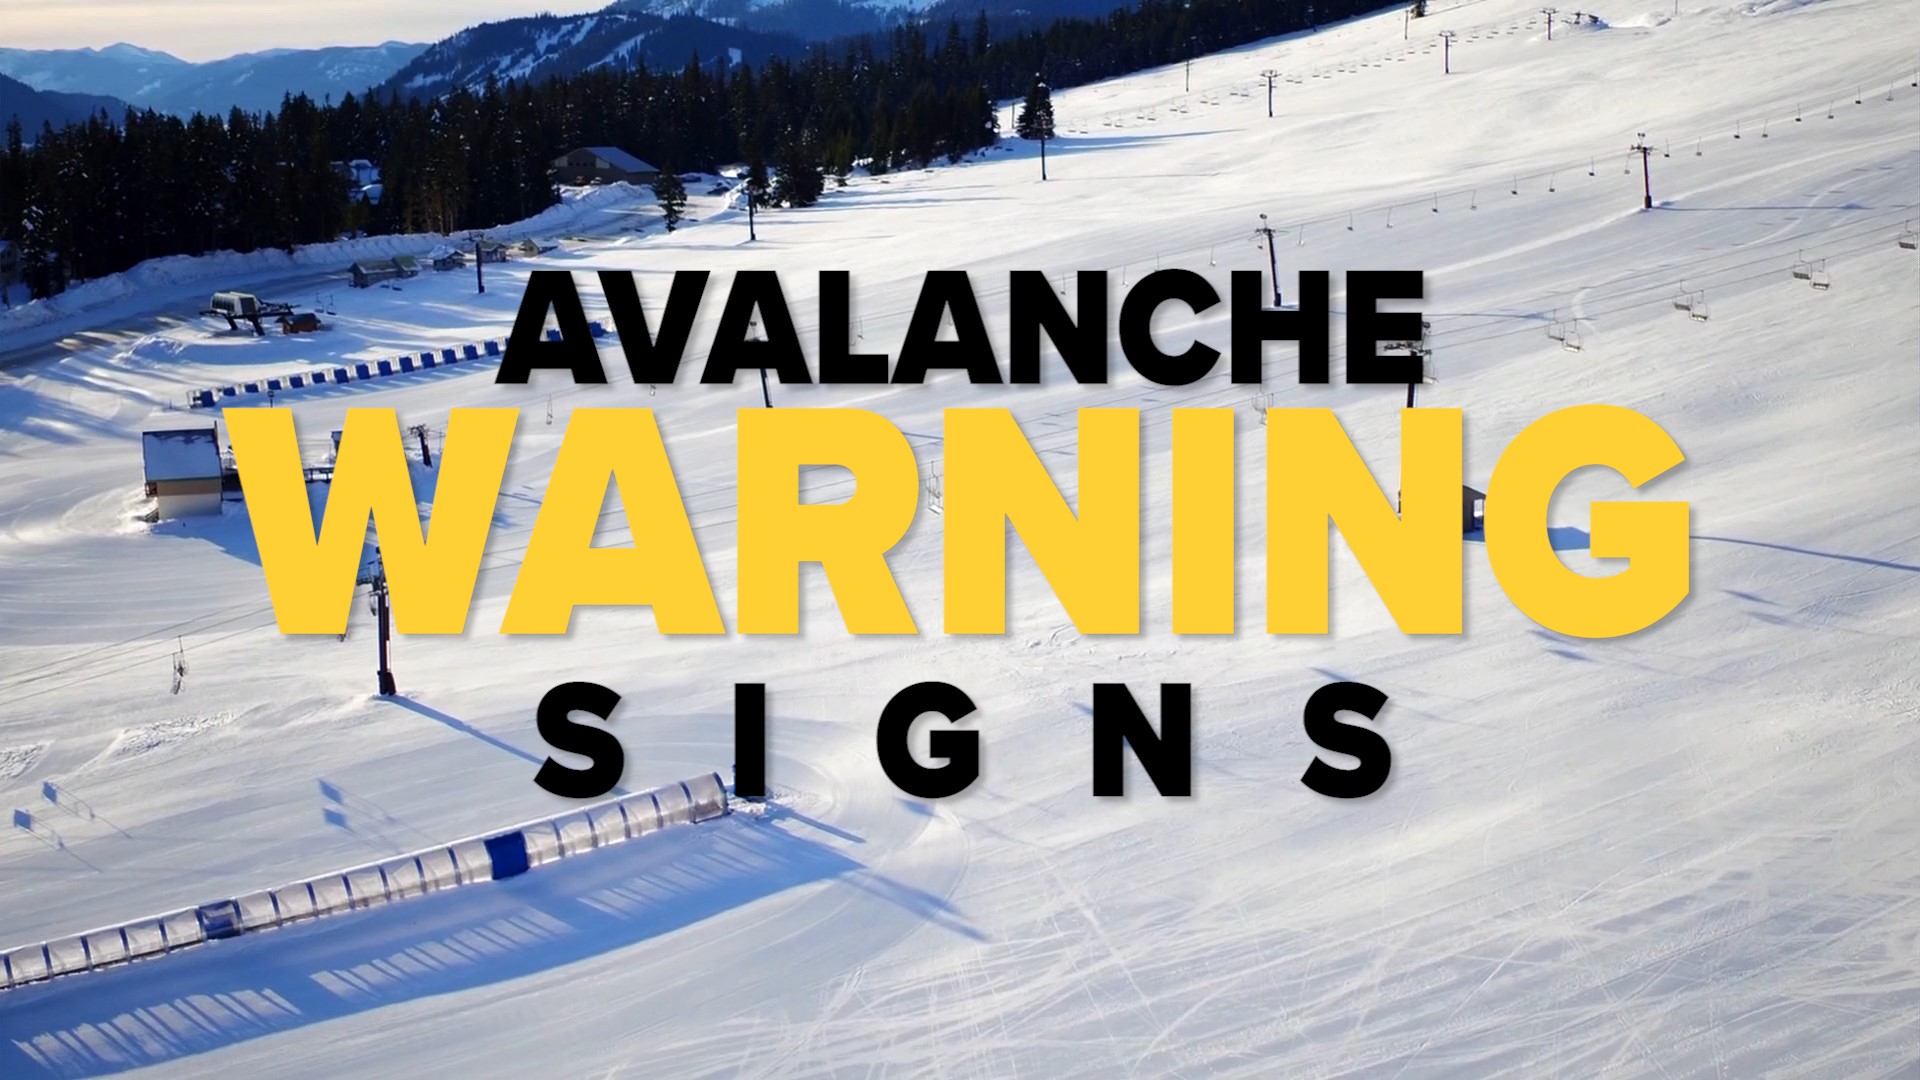 Five early warning signs that could help you avoid an avalanche according to the Northwest Avalanche Center